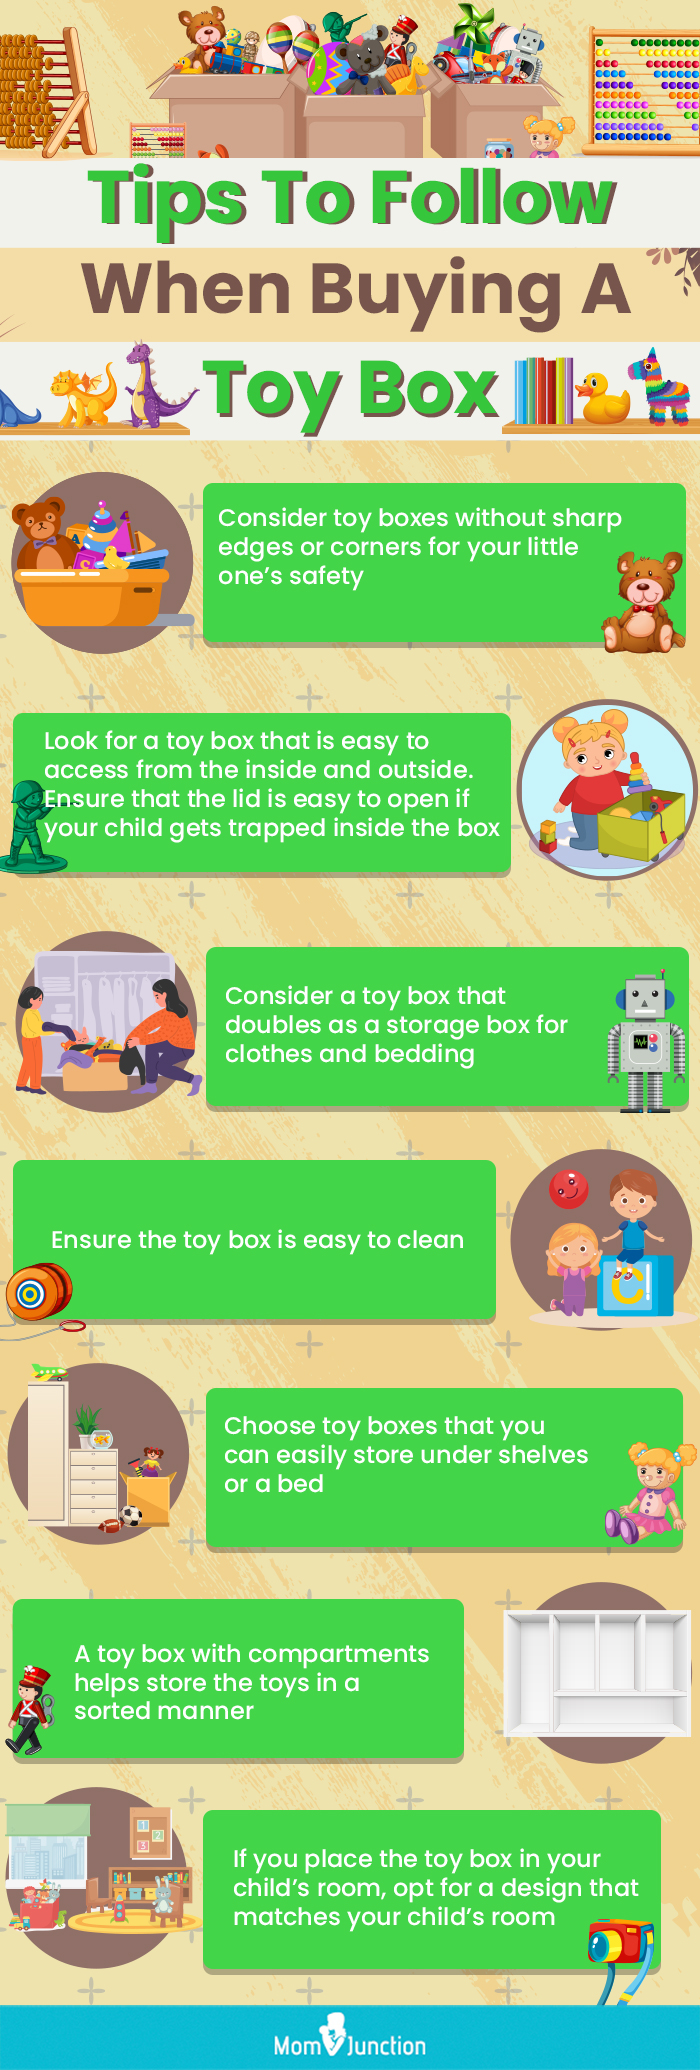 Tips To Follow When Buying A Toy Box